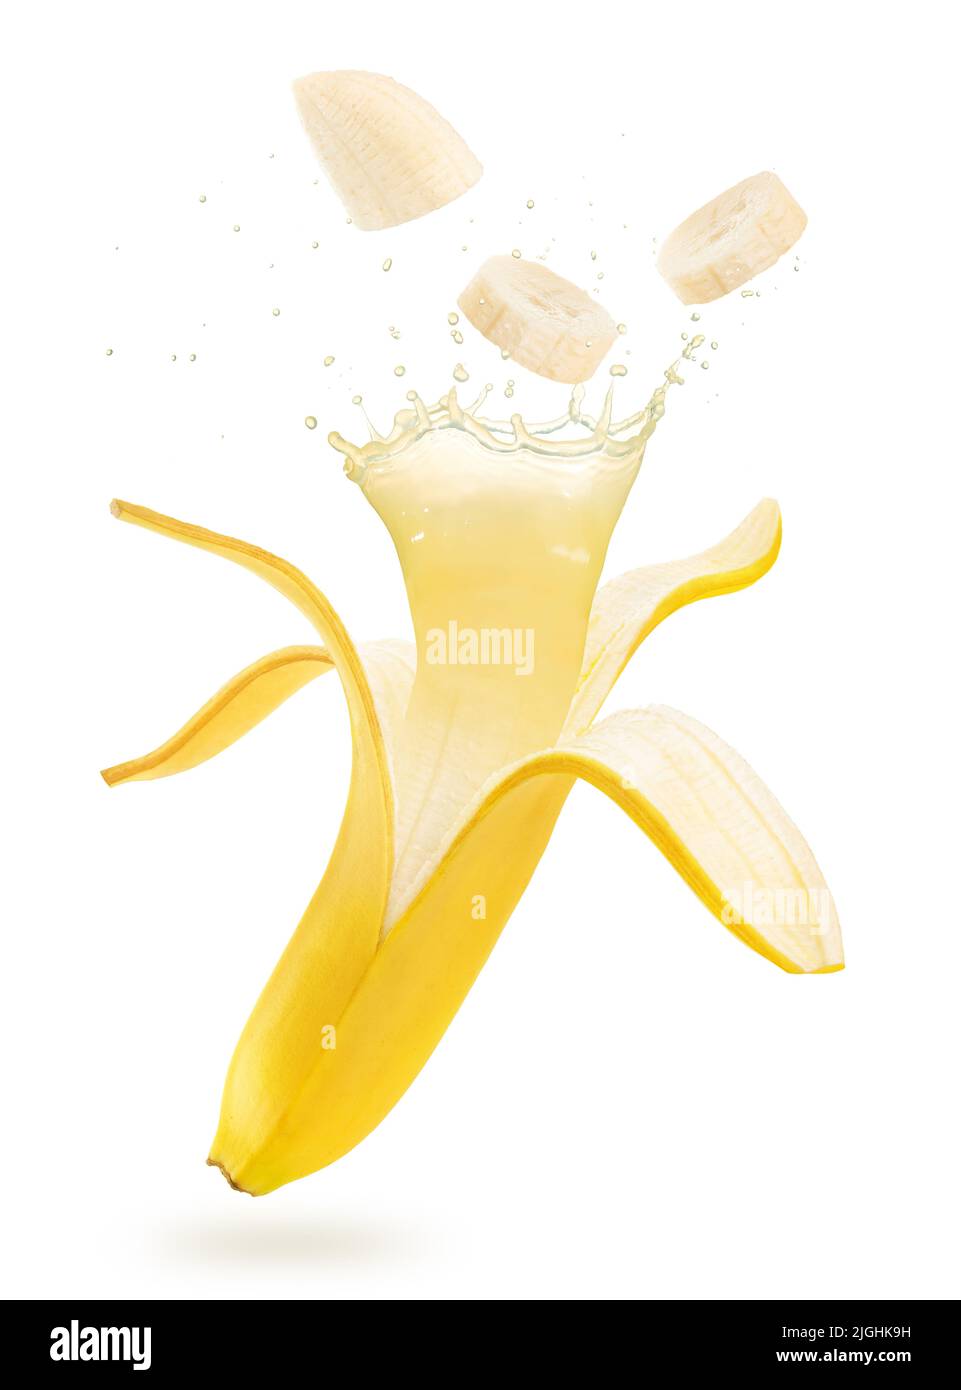 juice splashing out of an open and sliced banana floating isolated on white background Stock Photo